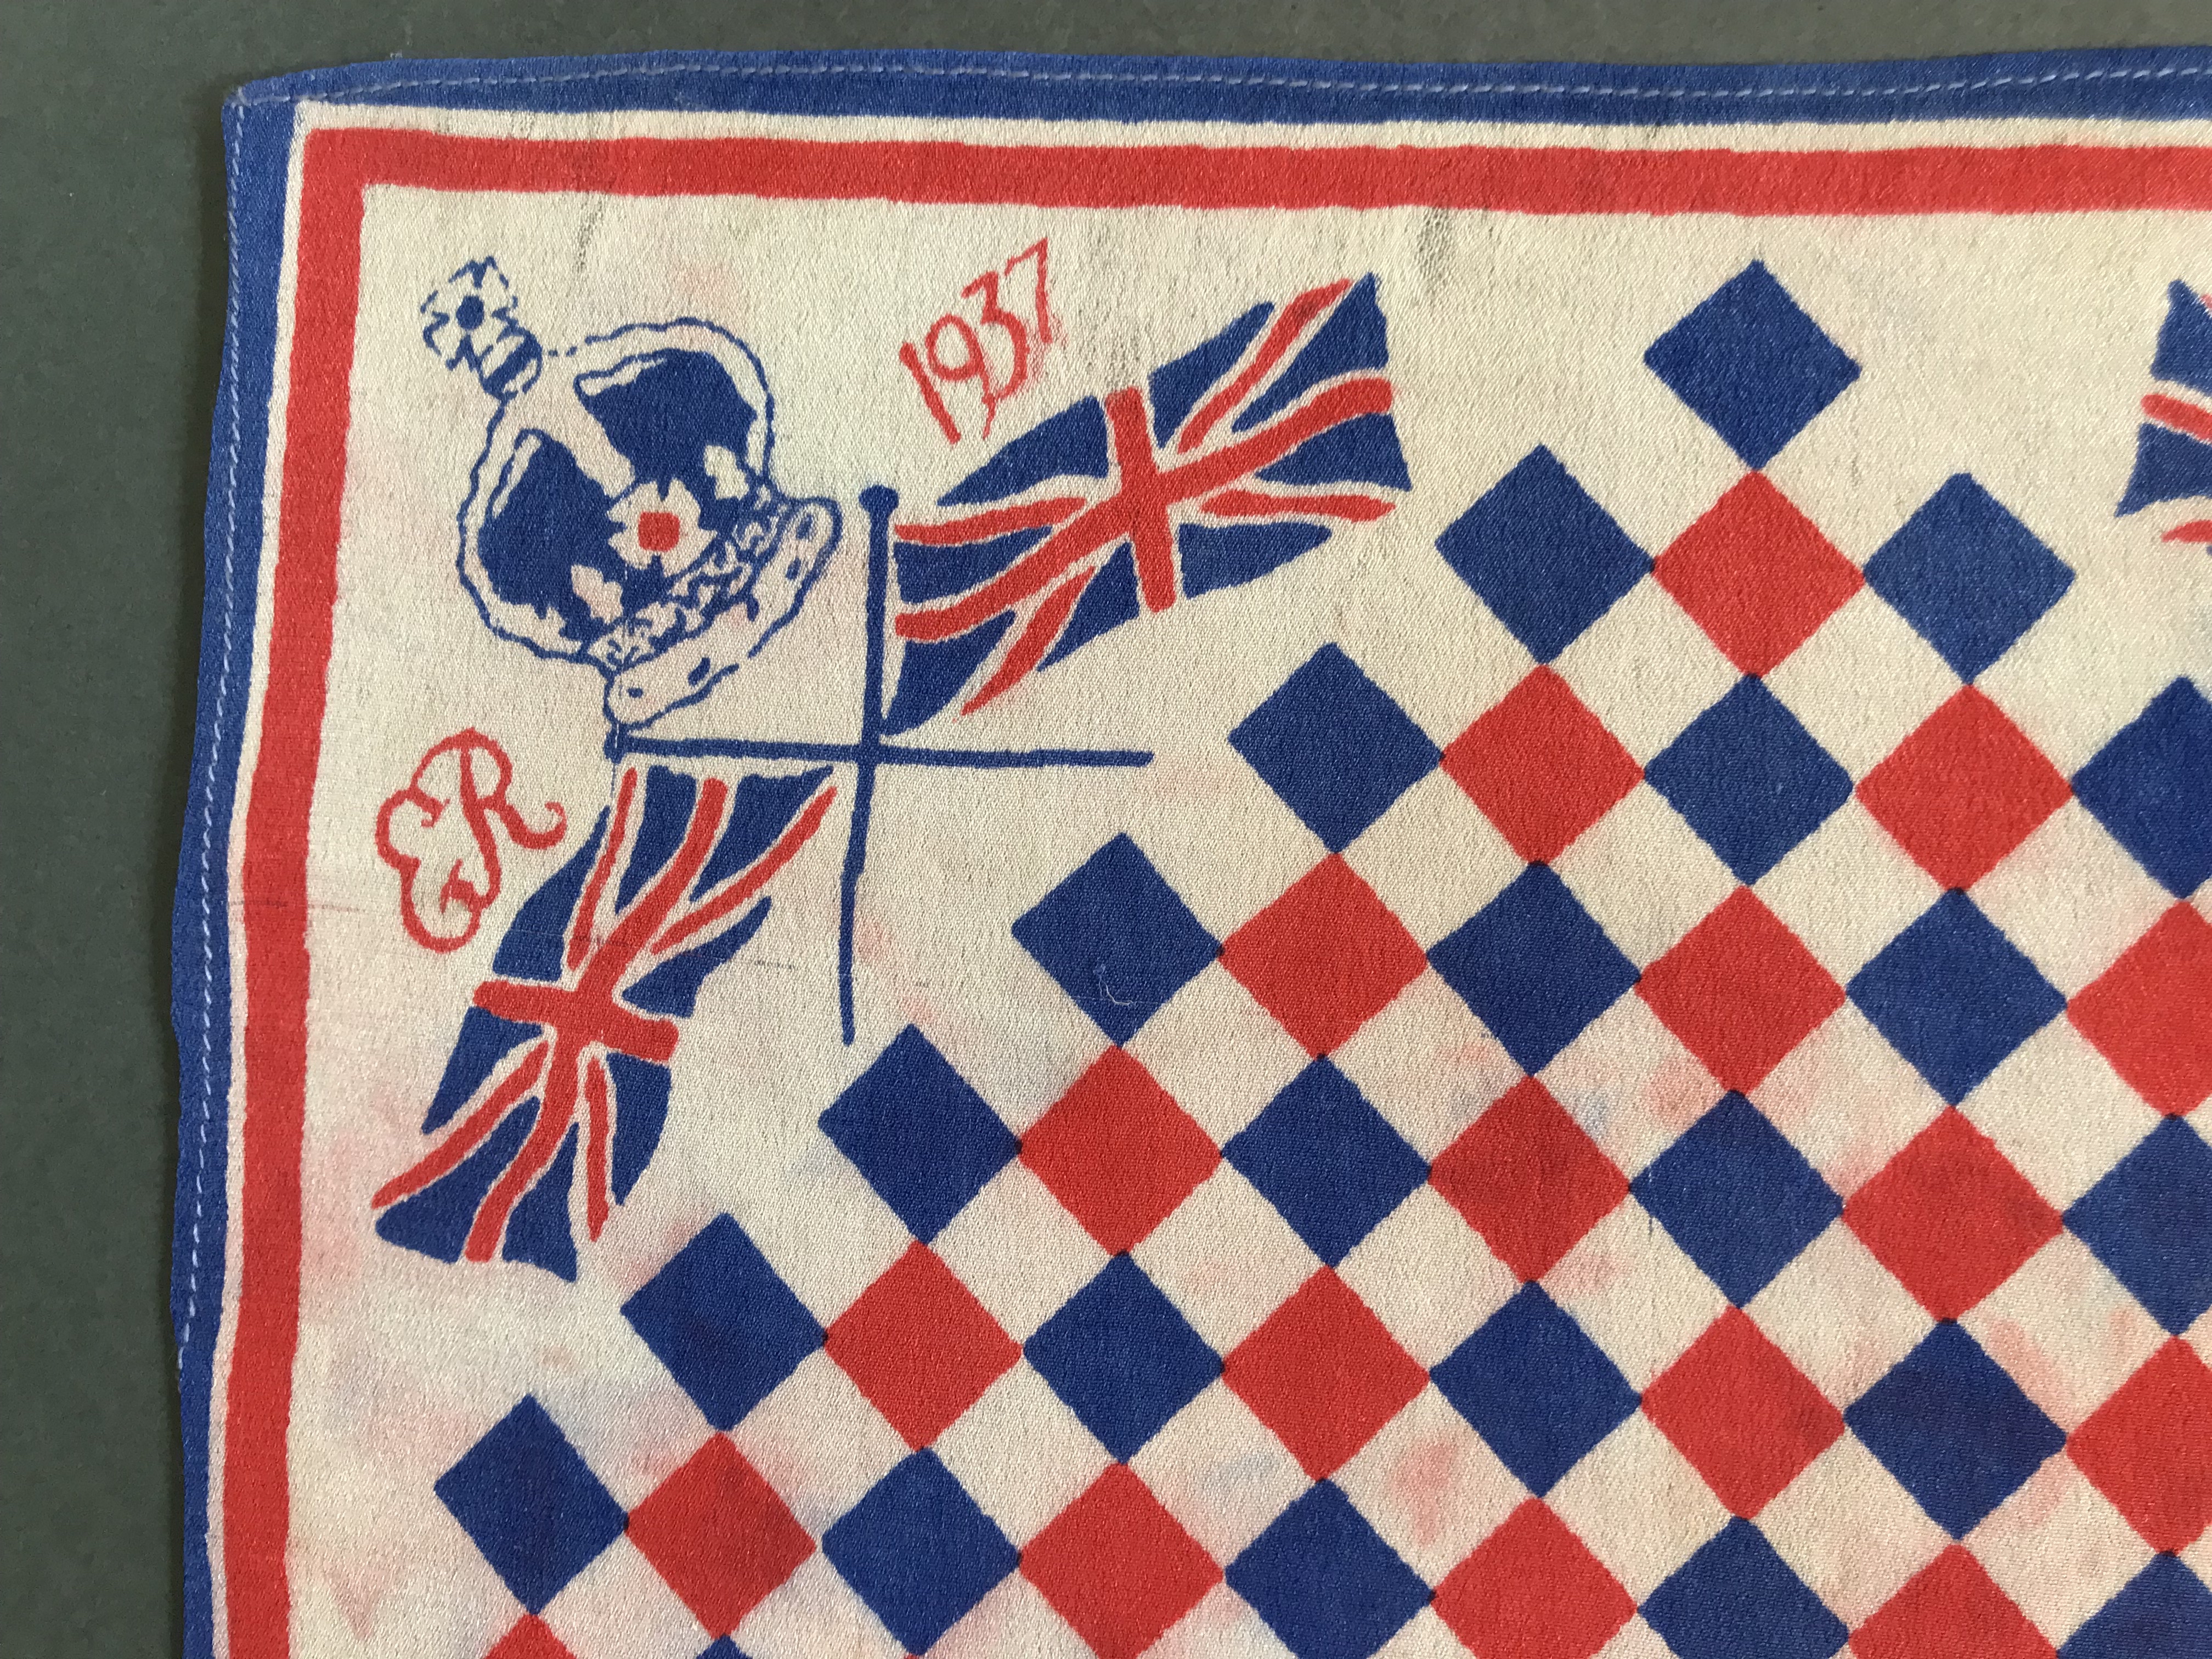 1937 Edward VIII Cancelled Coronation Commemorative Hankie, Printed in 1936, 100% Silk, 26cm square - Image 2 of 2